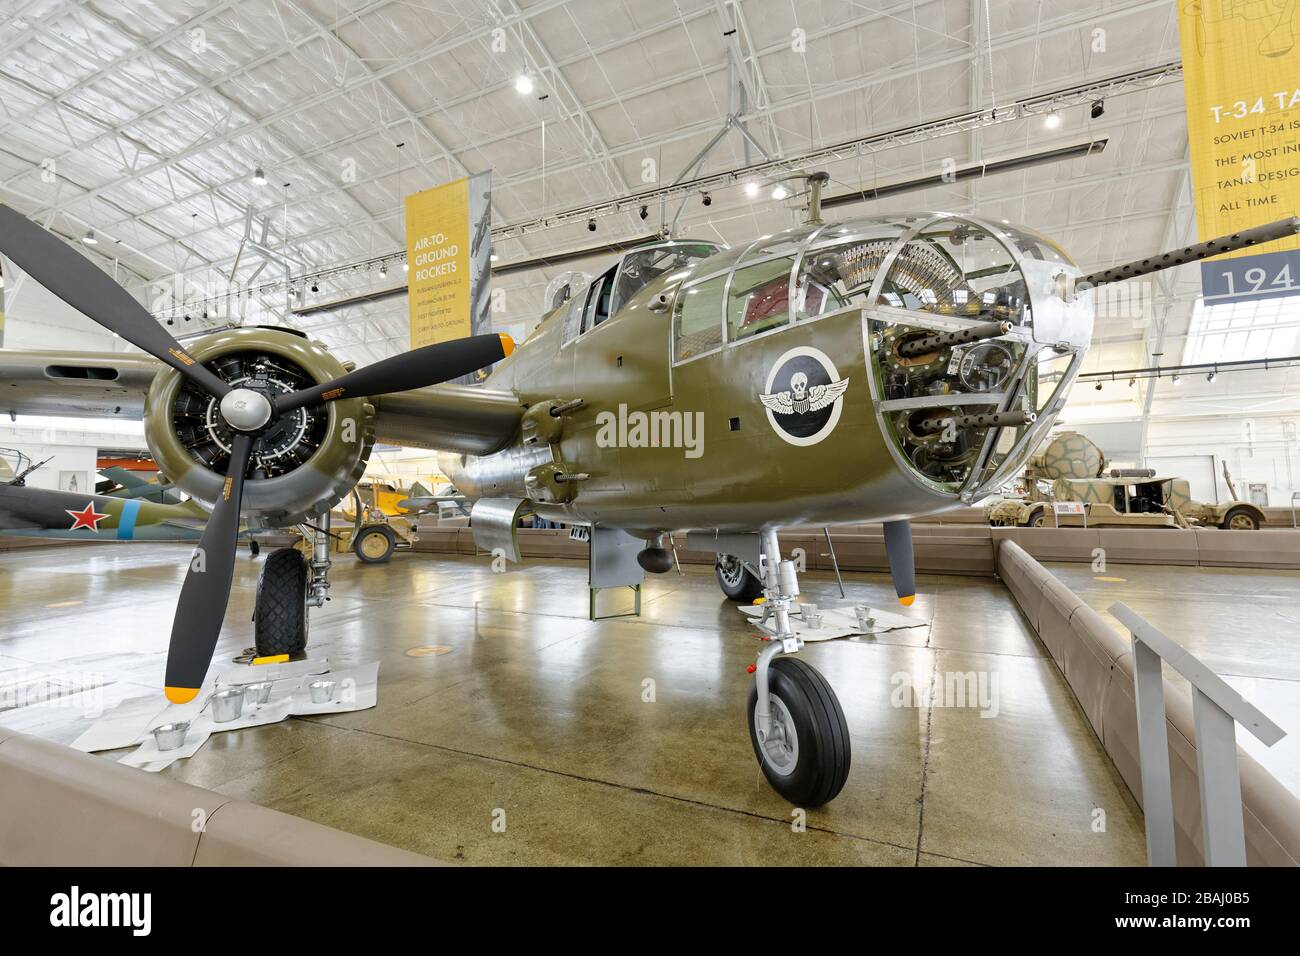 SEPTEMBER 19, 2015, EVERETT, WA: Wide angle shot of the nose and right engine on a U.S. B-25 Mitchell bomber. Stock Photo